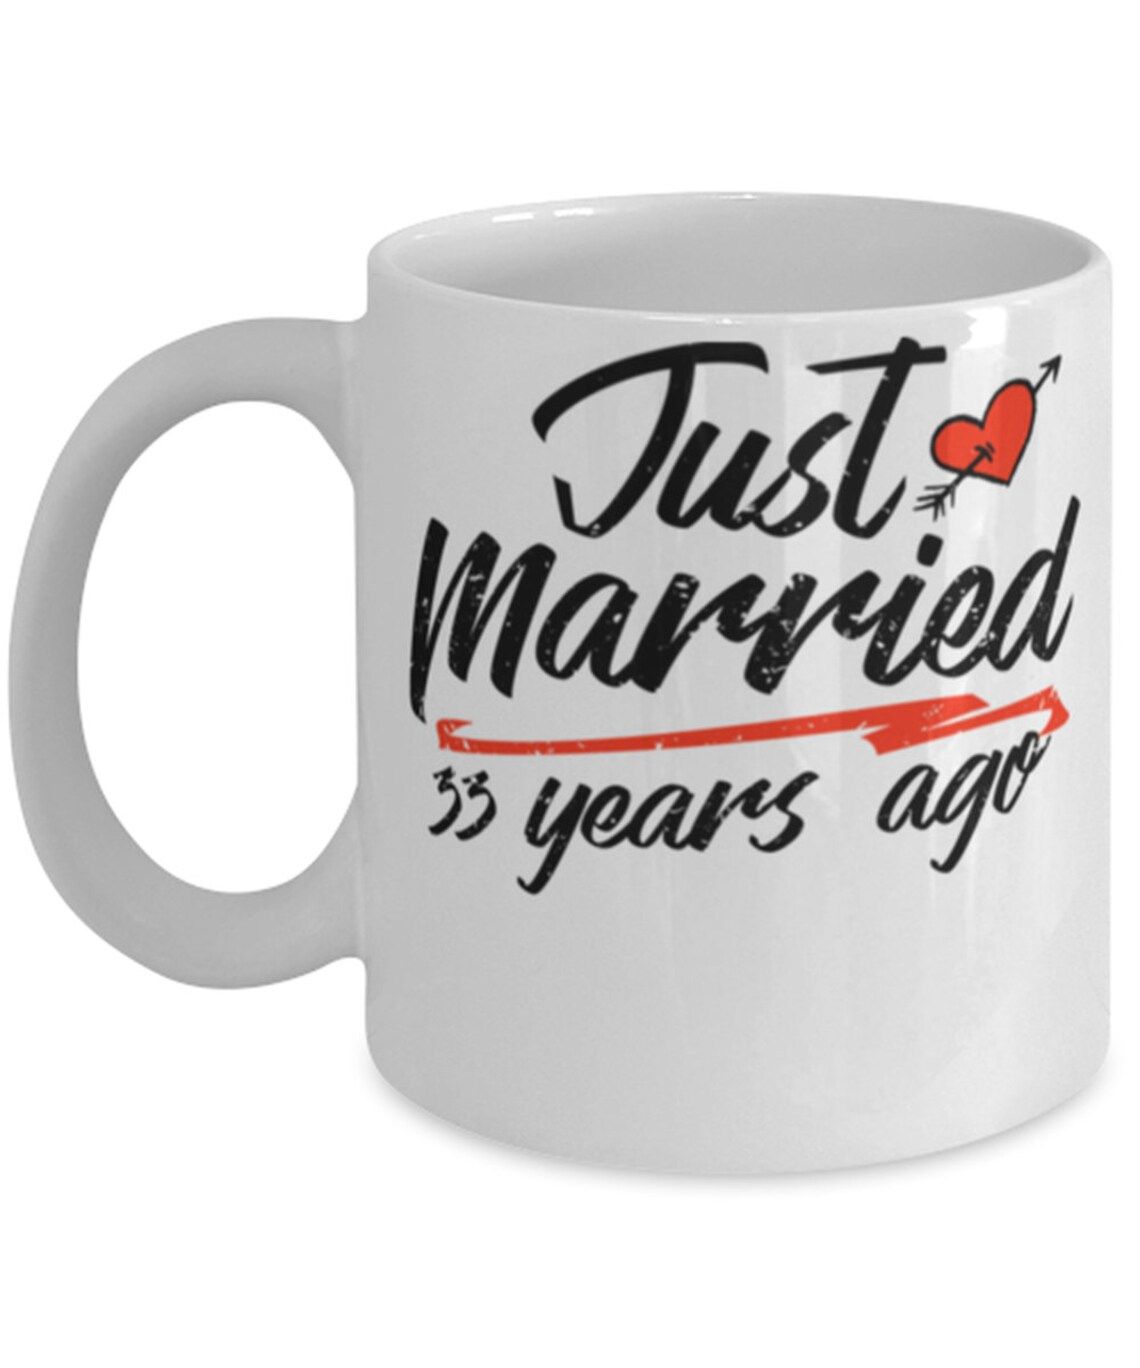 33Rd Wedding Anniversary Mug, Gift For Couple, Husband & Wife, Him & Her, Just Married 33 Years Ago